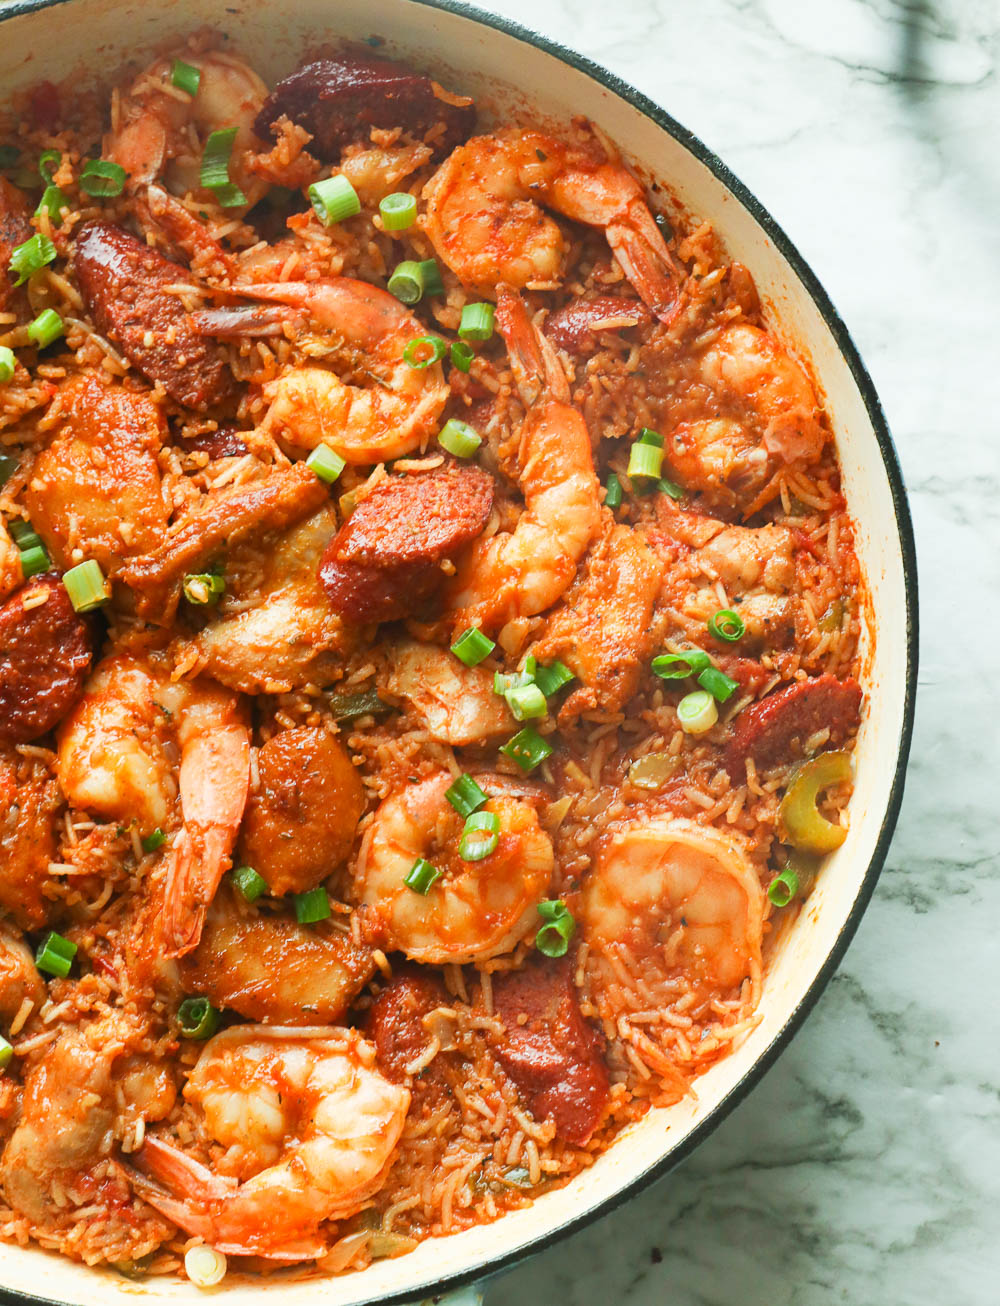 a pan of freshly cooked jambalaya with shrimp, sausages, and chicken